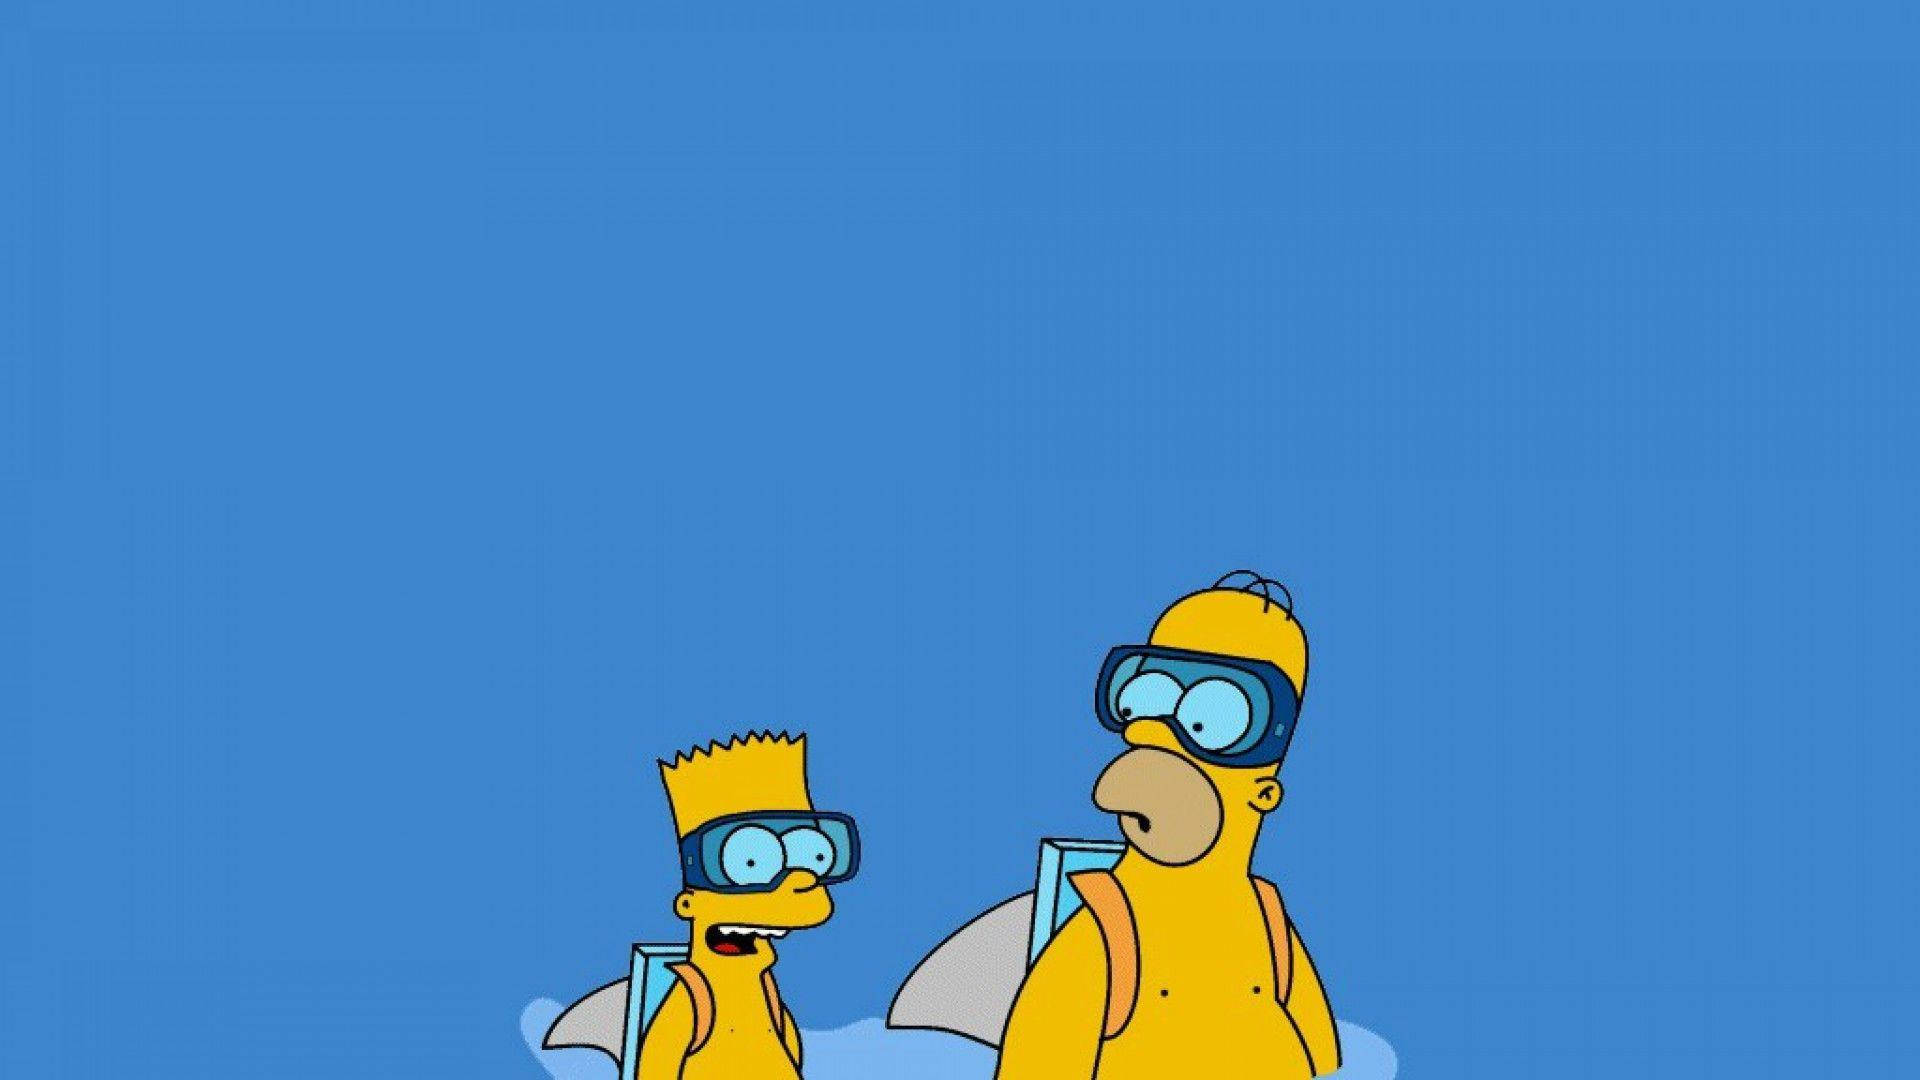 Cool Simpsons Iphone Screensaver Background